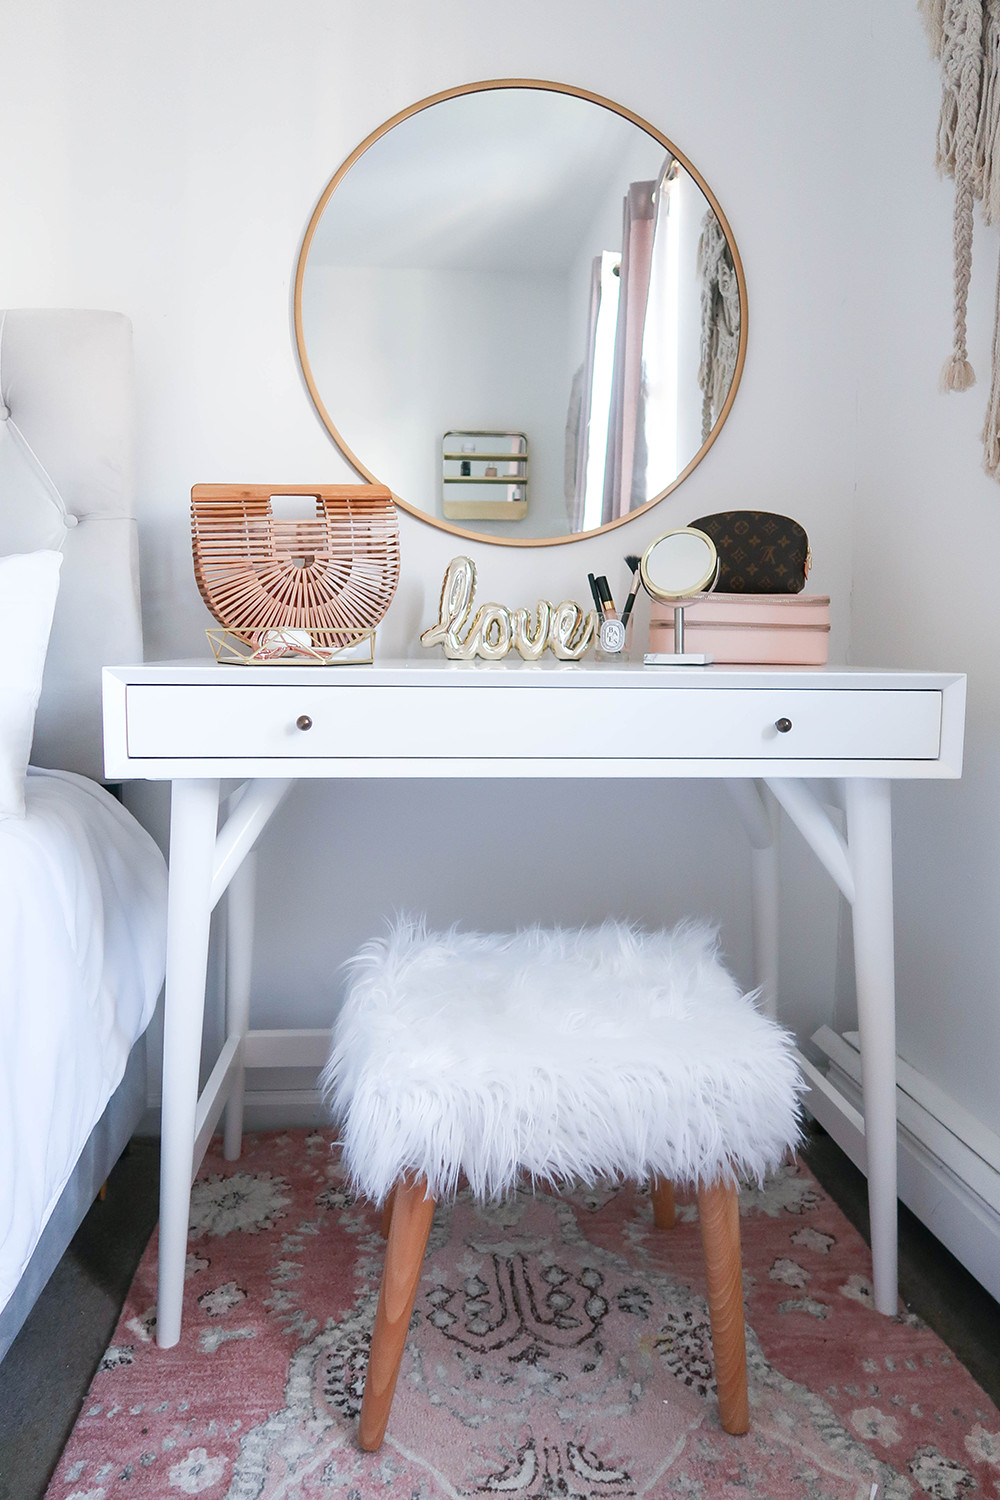 Small Bedroom Vanity
 Styling A Vanity In A Small Space Money Can Buy Lipstick